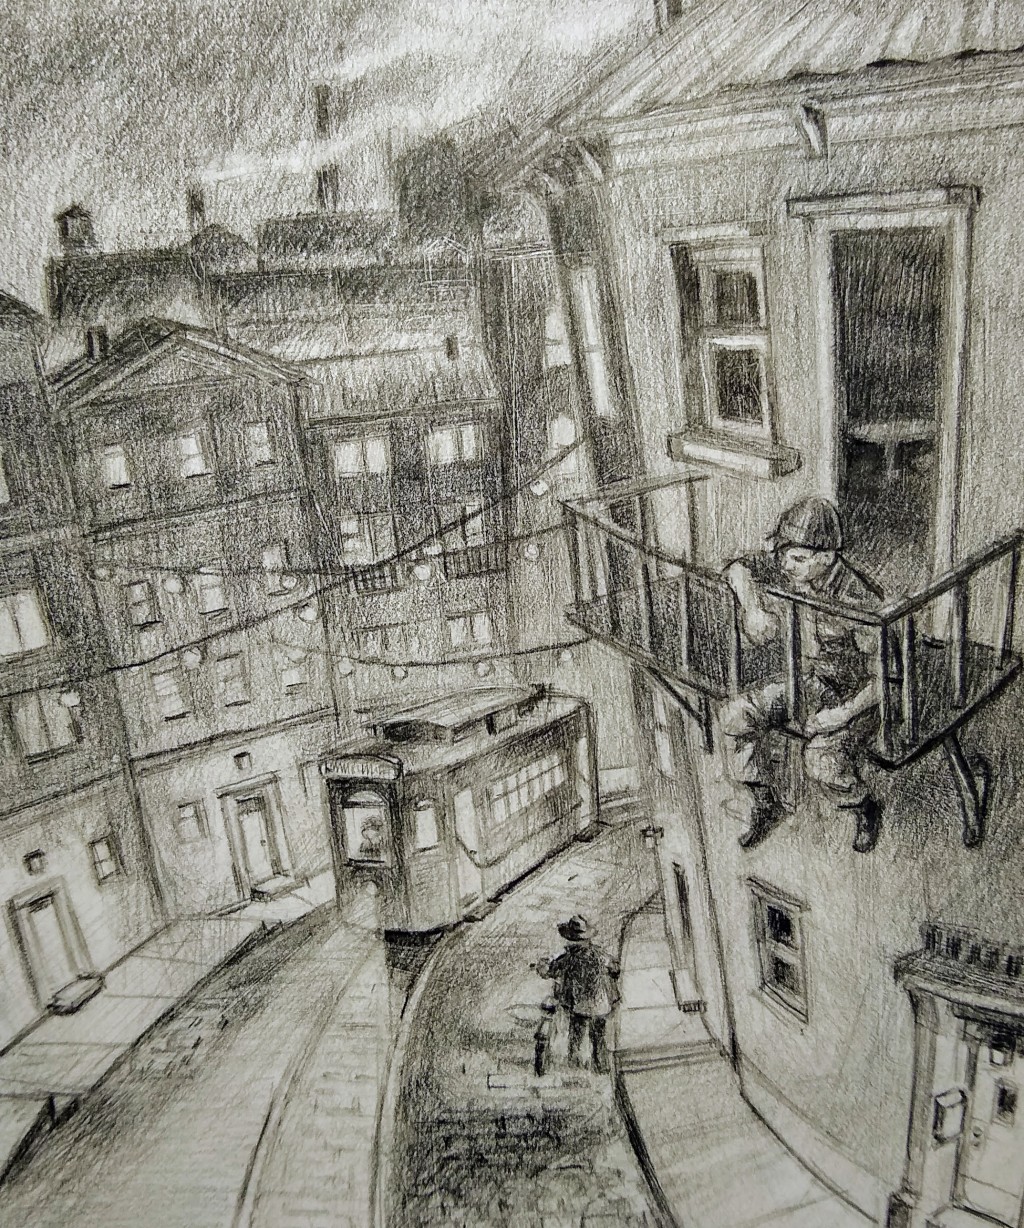 A city scene drawing of Bath on a large canvas before I take the leap with  paint 90x60cm  rdrawing